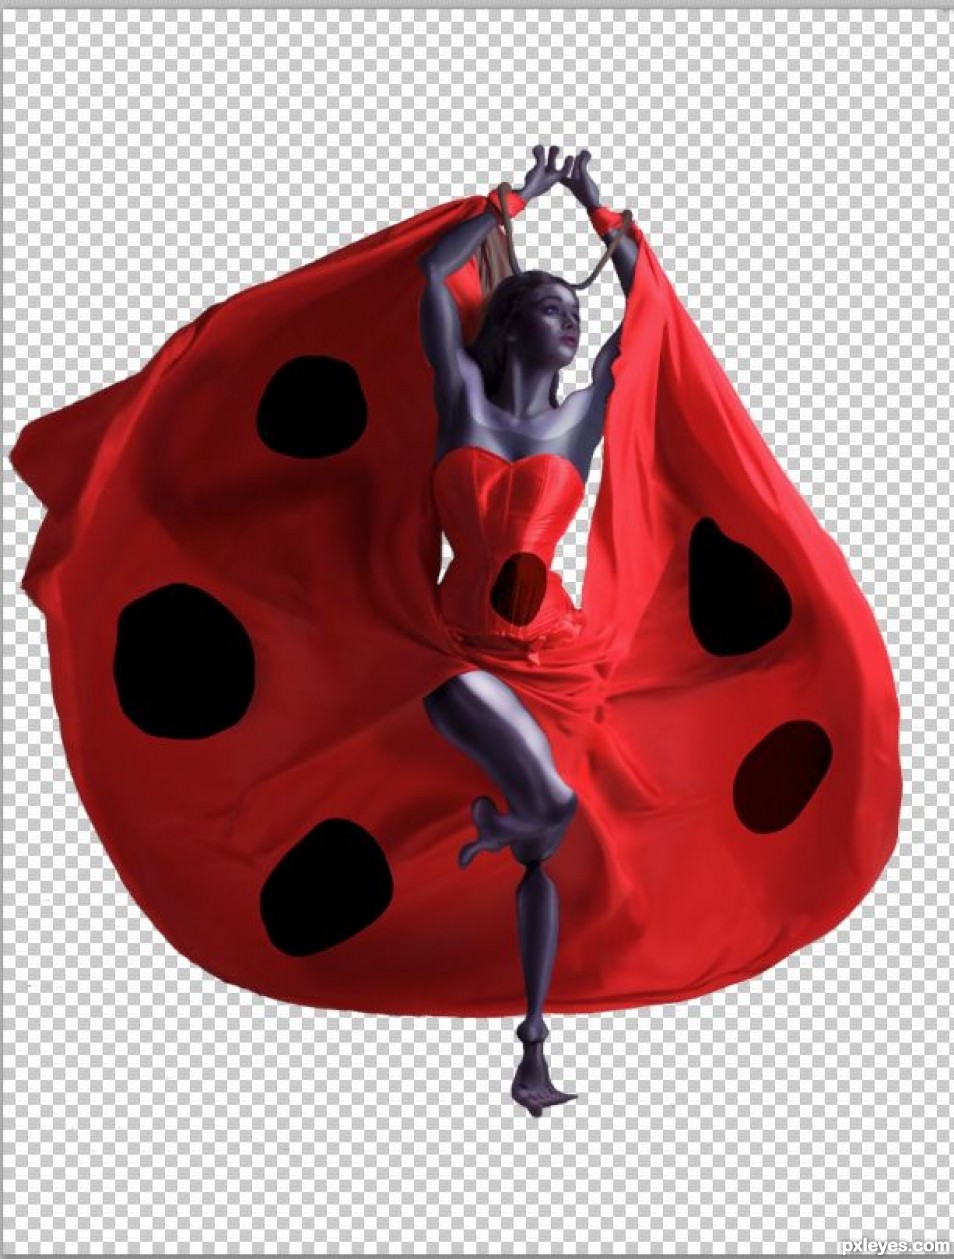 Creation of Does this lady bug you?: Step 4